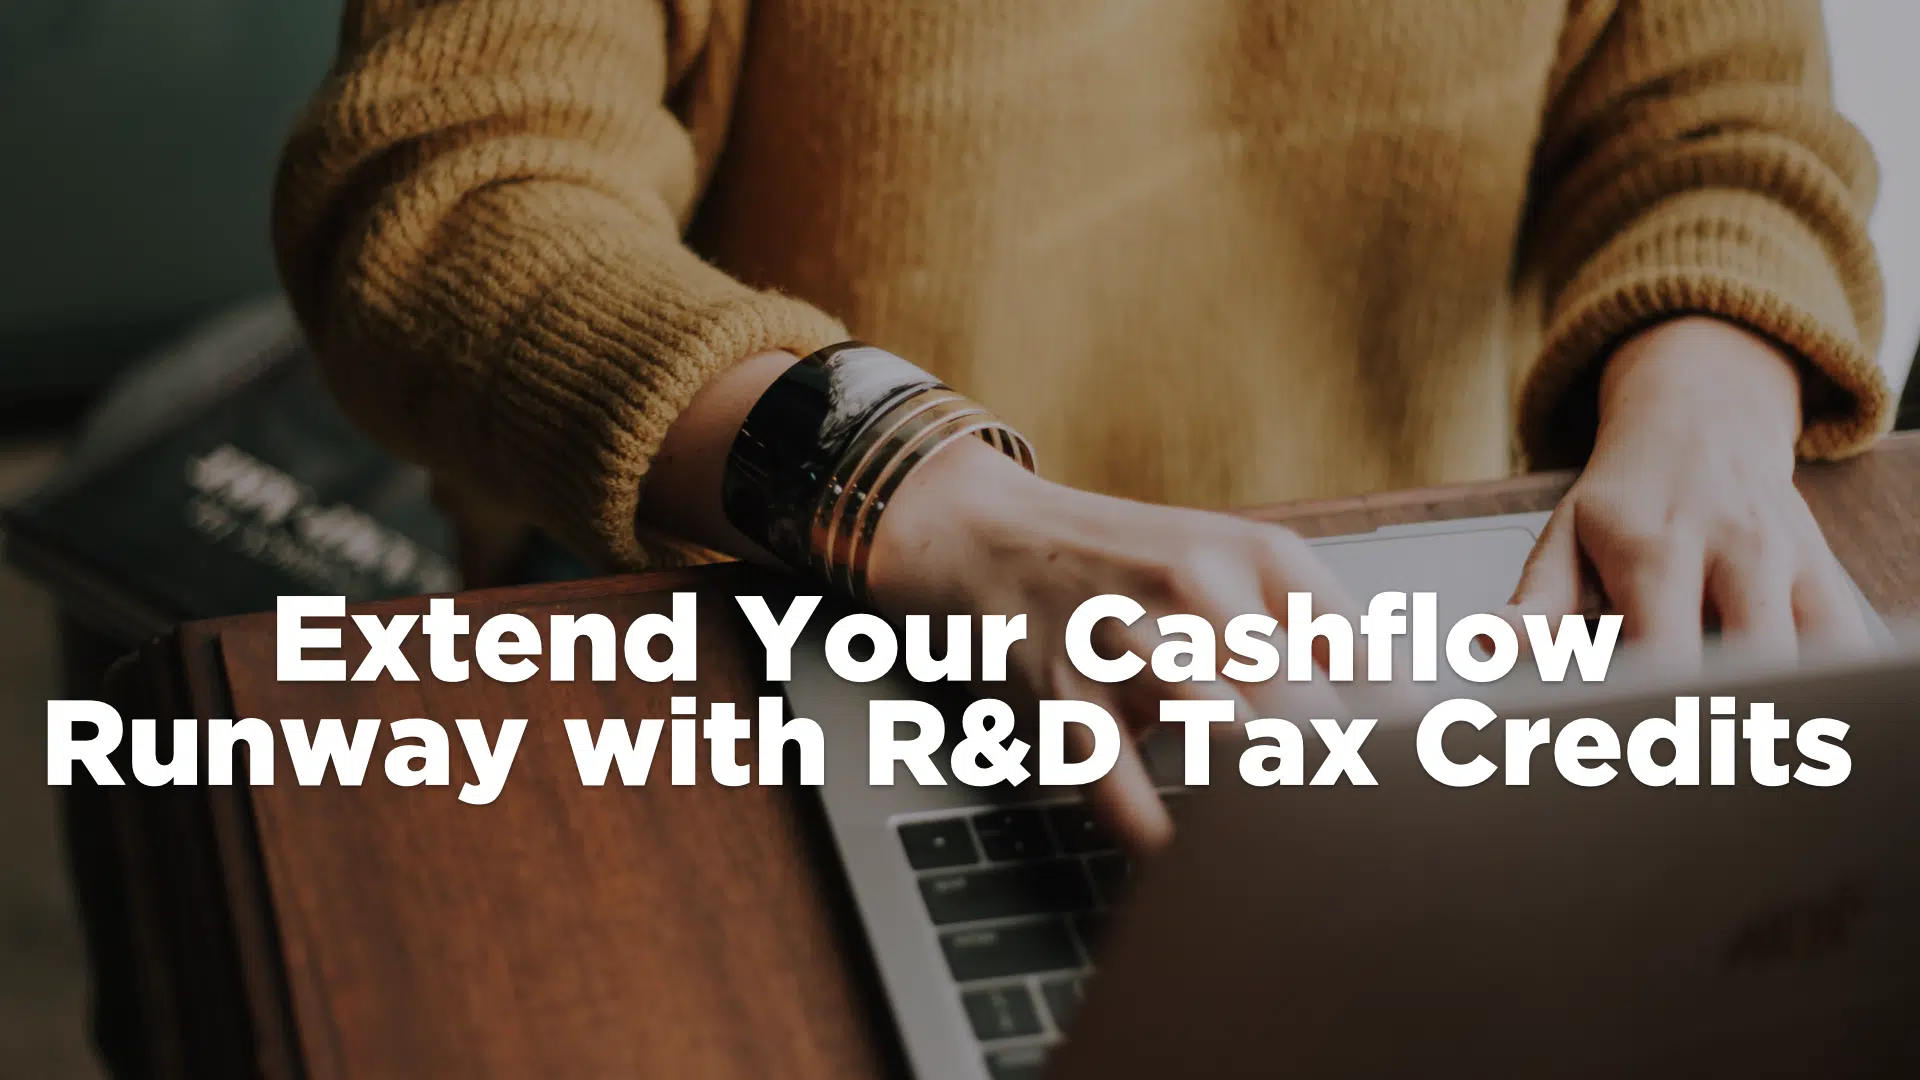 Webinar: Extend Your Cash Flow Runway with R&D Tax Credits